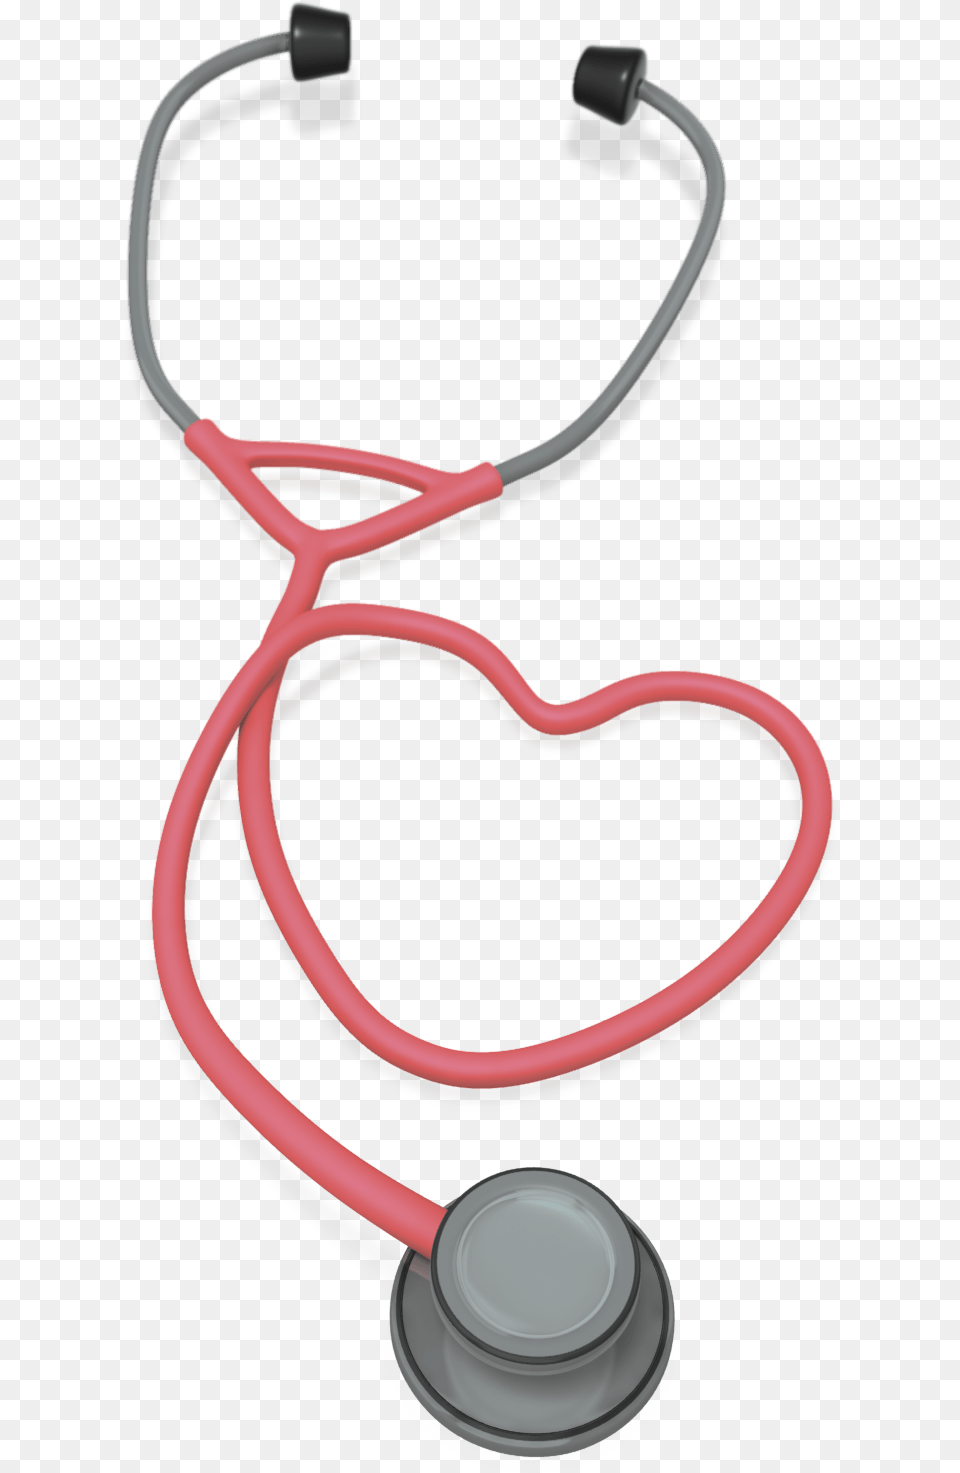 Heart Stethoscope Clipart Stethoscope Transparent Background, Smoke Pipe Free Png